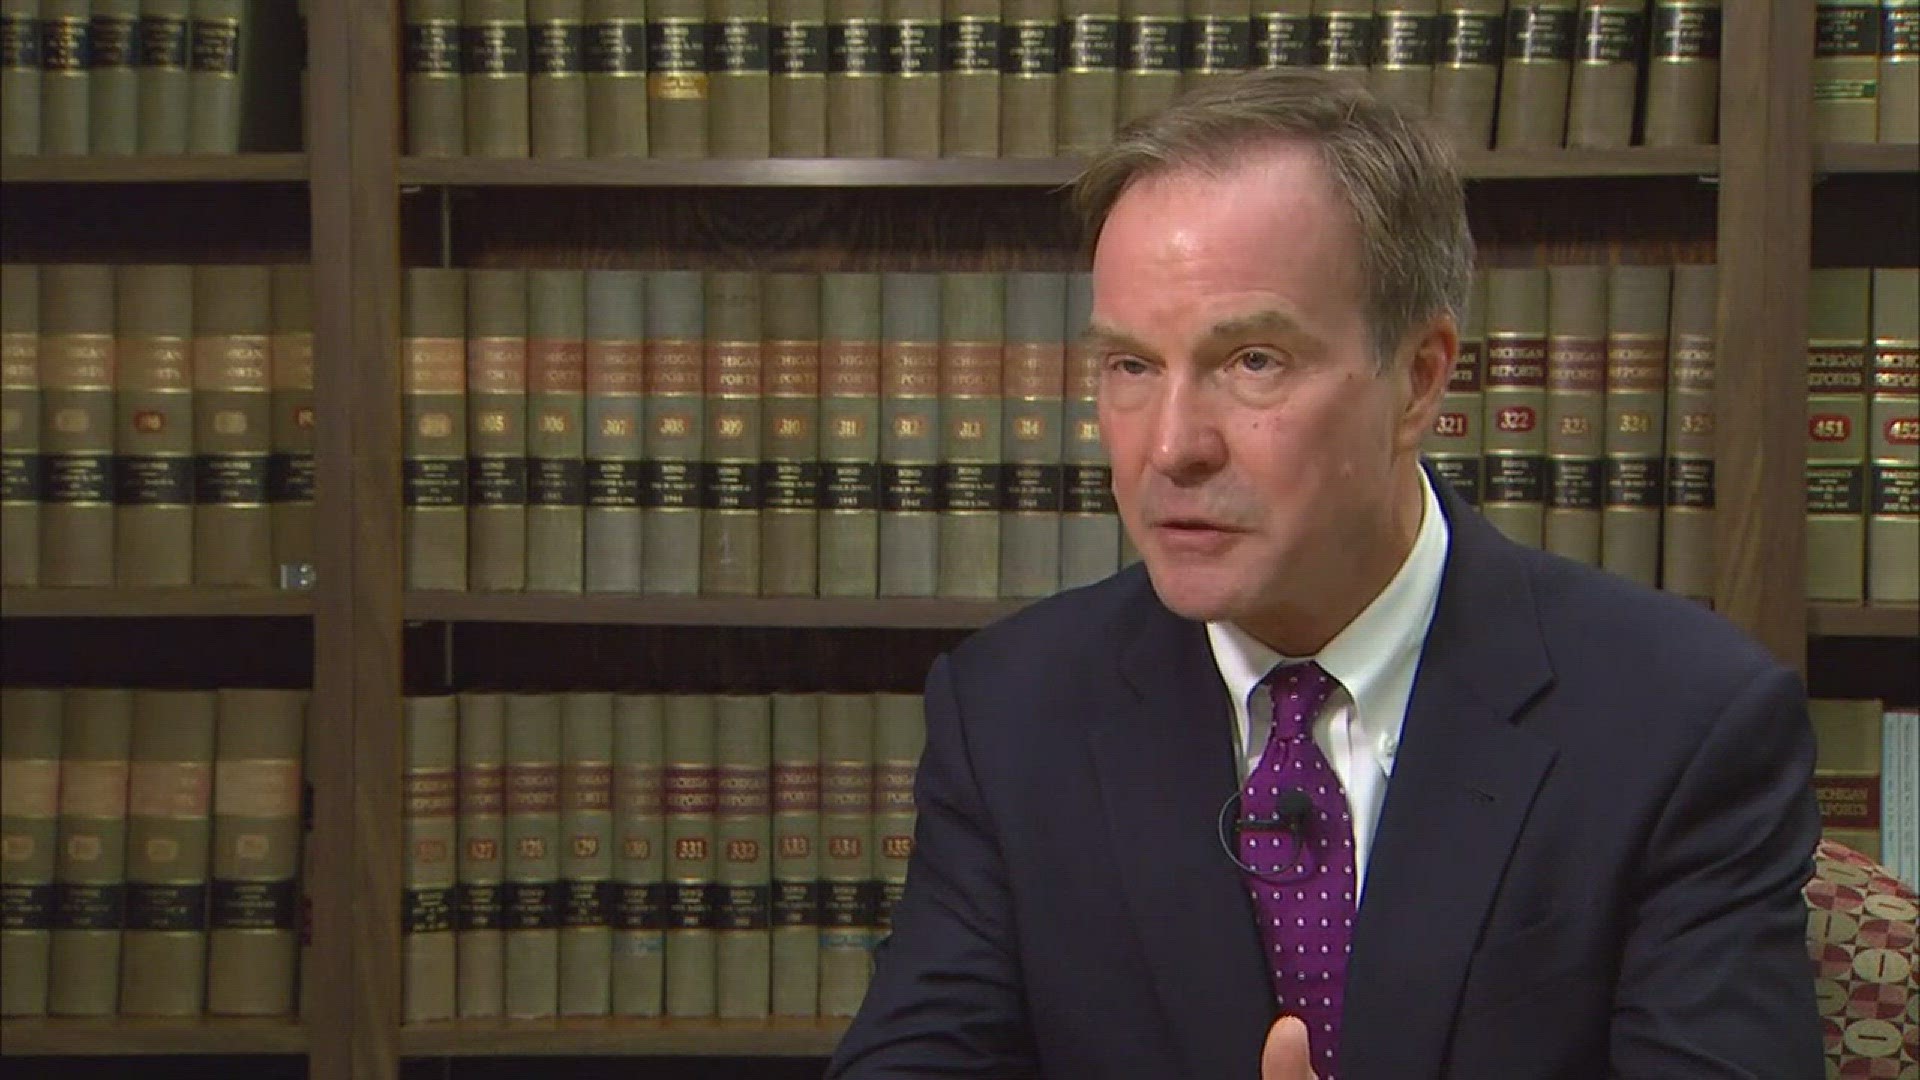 Michigan Attorney General Bill Schuette is charging eleven former caregivers at the Grand Rapids Home for Veterans with falsifying medical records.